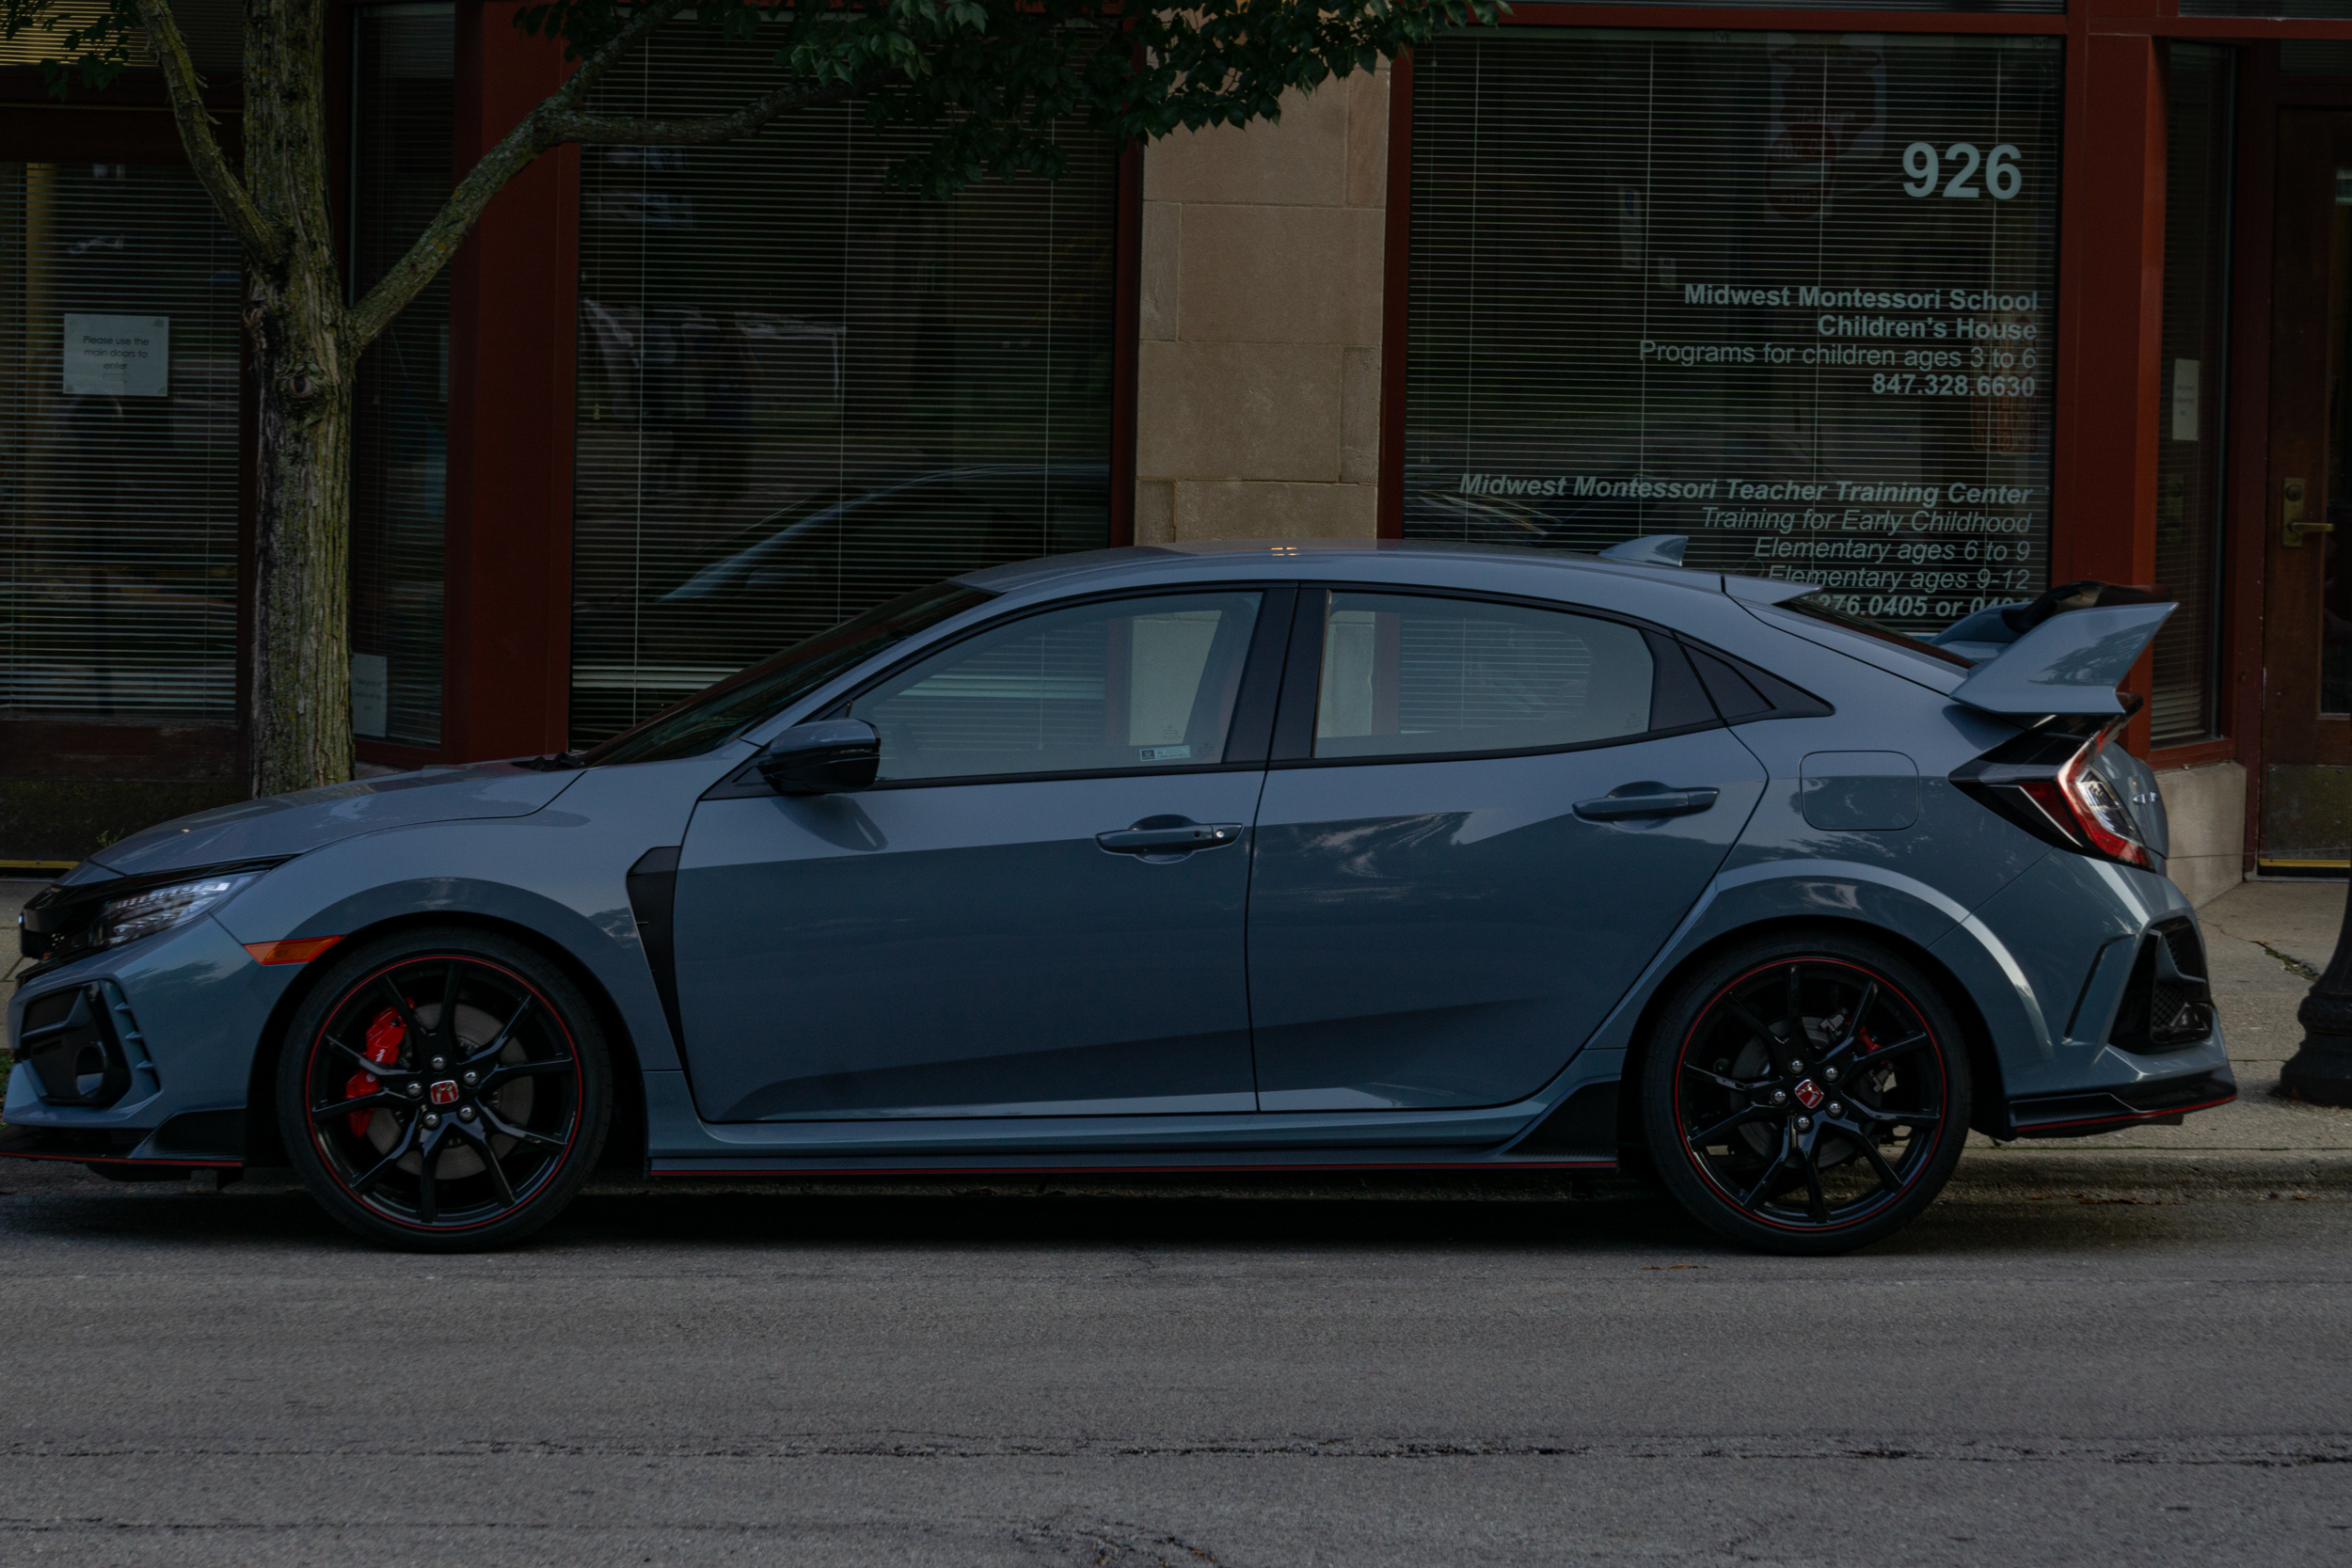 The side view of a gray 2020 Honda Civic Type R on a city street